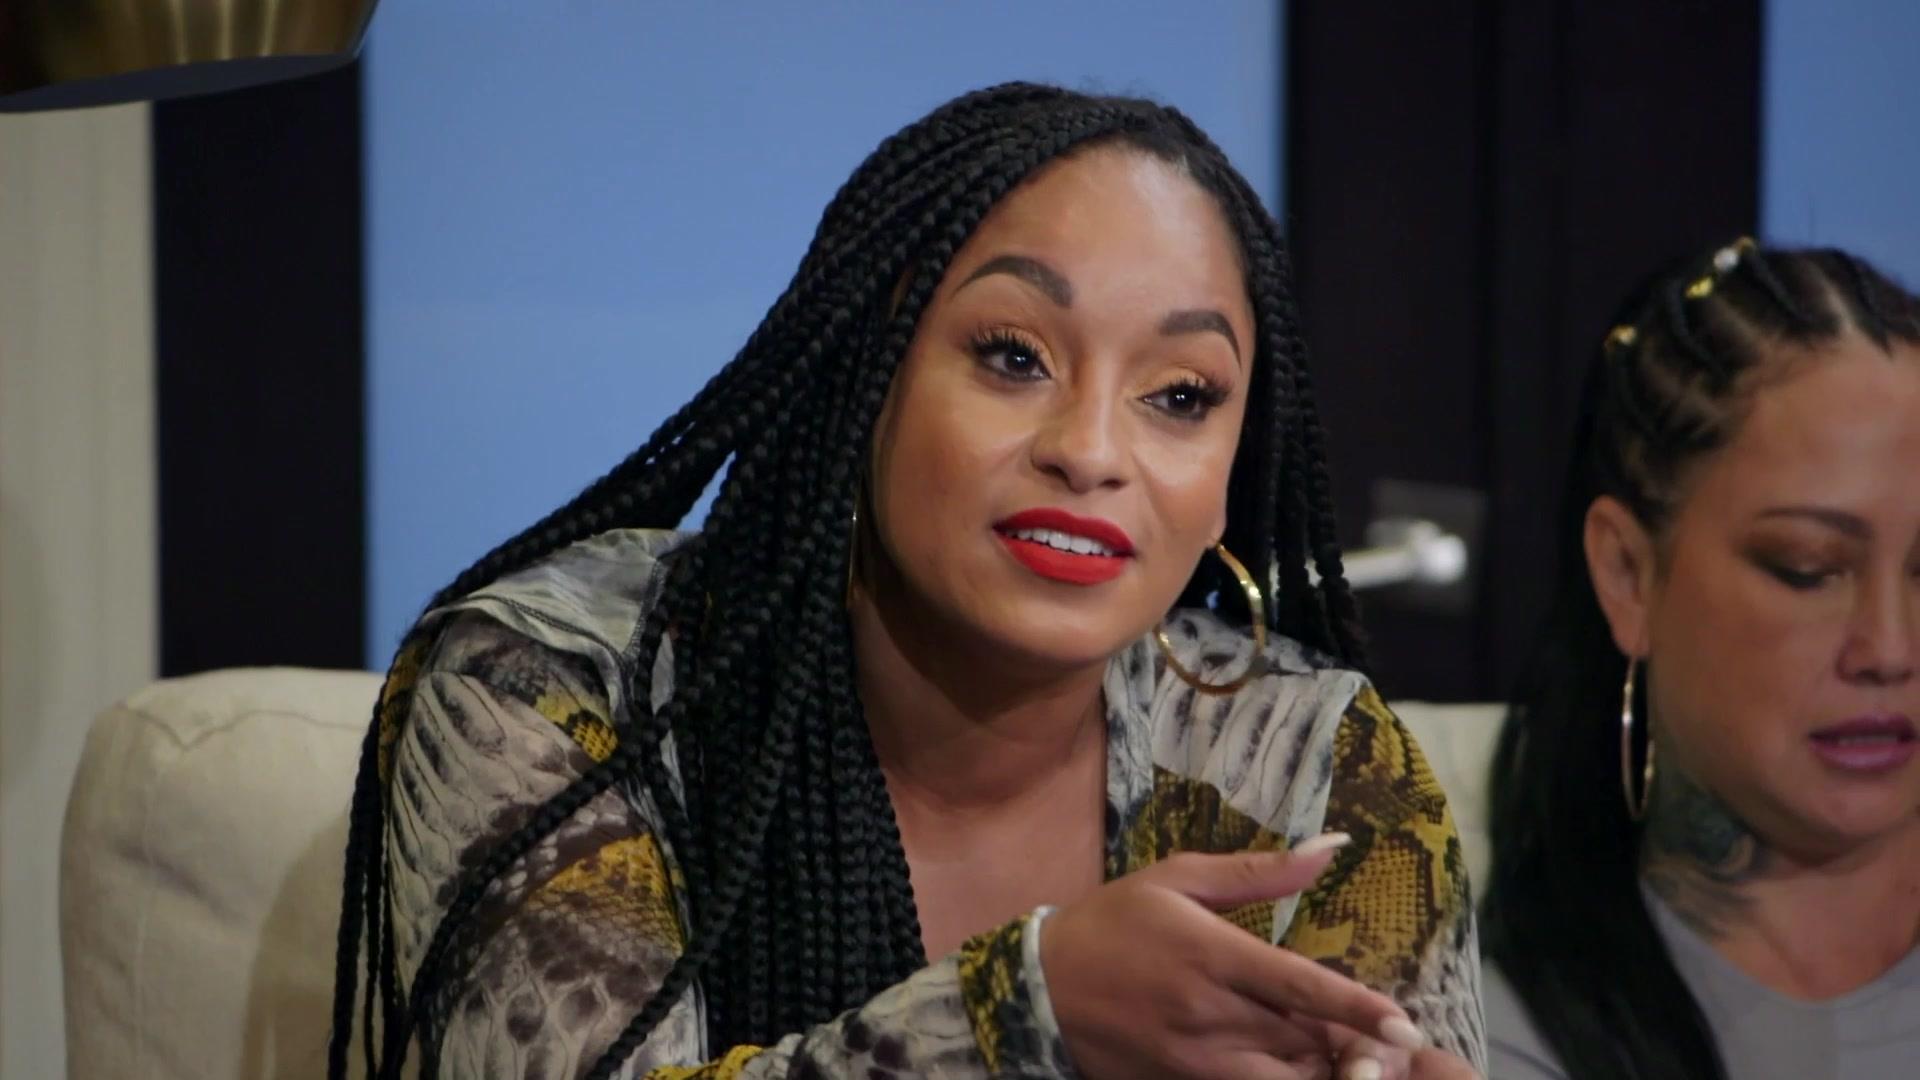 Watch Tahiry Finds Out About Vado's Secret | Marriage Boot Camp: Hip Hop Edition Video Extras